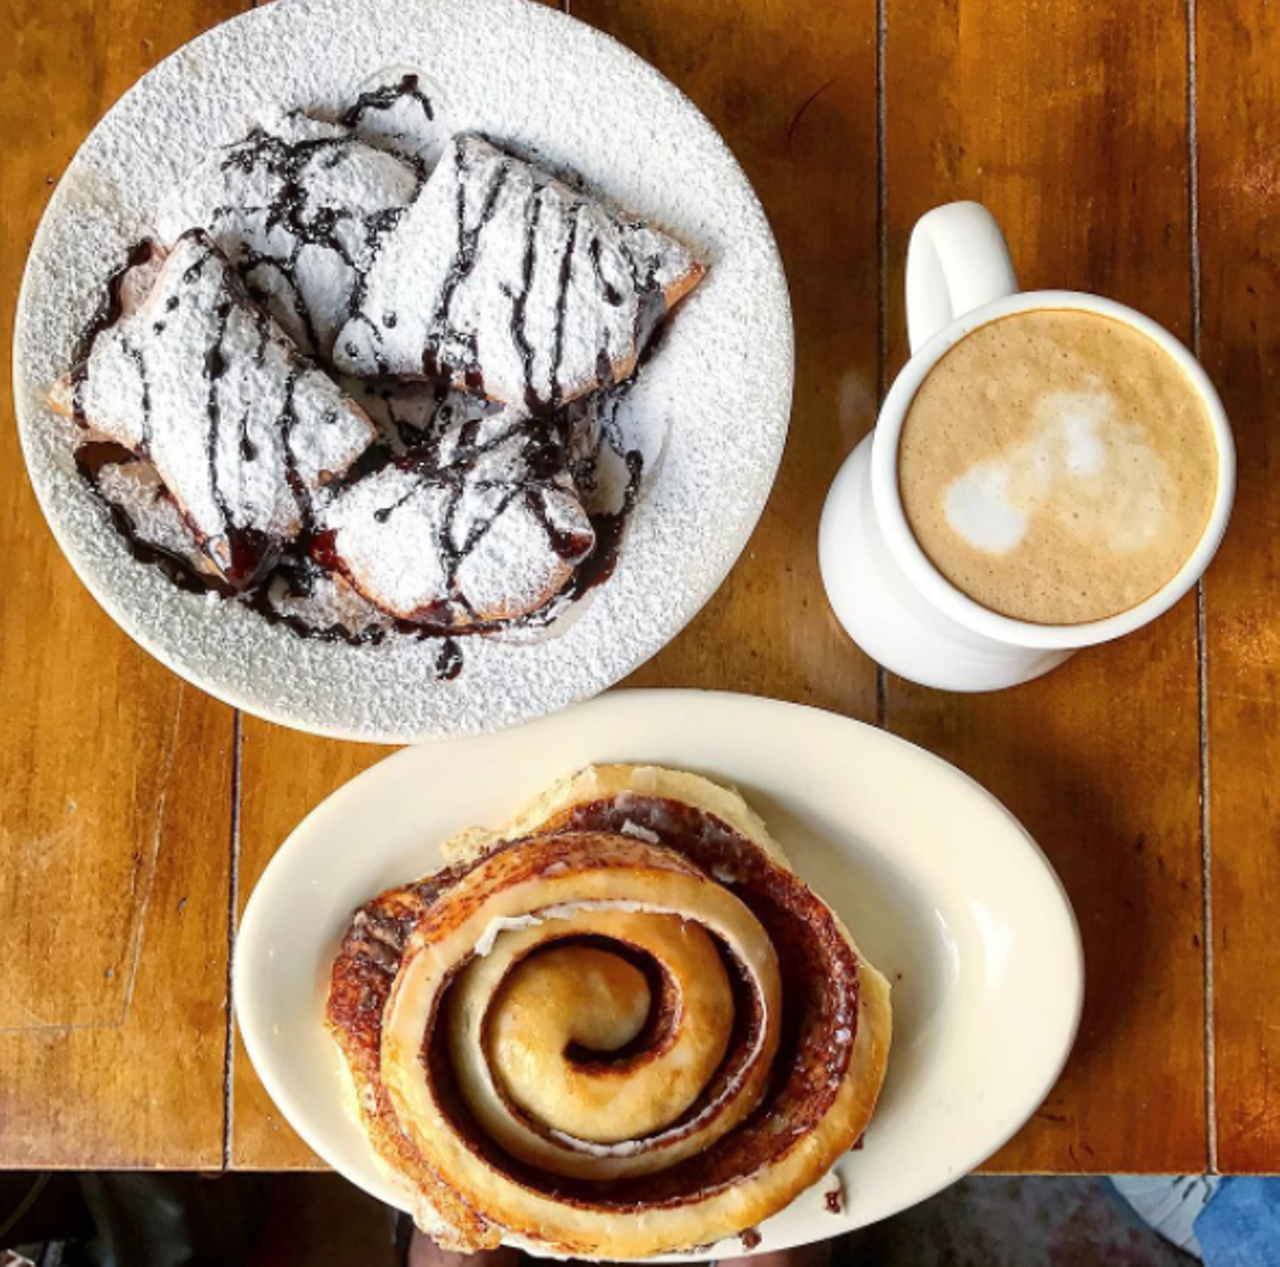 Rise Bakery
923 N. Loop 1604 E. Suite 101, (210) 764-4000,  risebakeryandcoffee.com
This Bakery and espresso bar offers a variety of housemade breads, baked goods, sweets, sandwiches and delicious burgers. 
Photo via Instagram, s.a.foodie